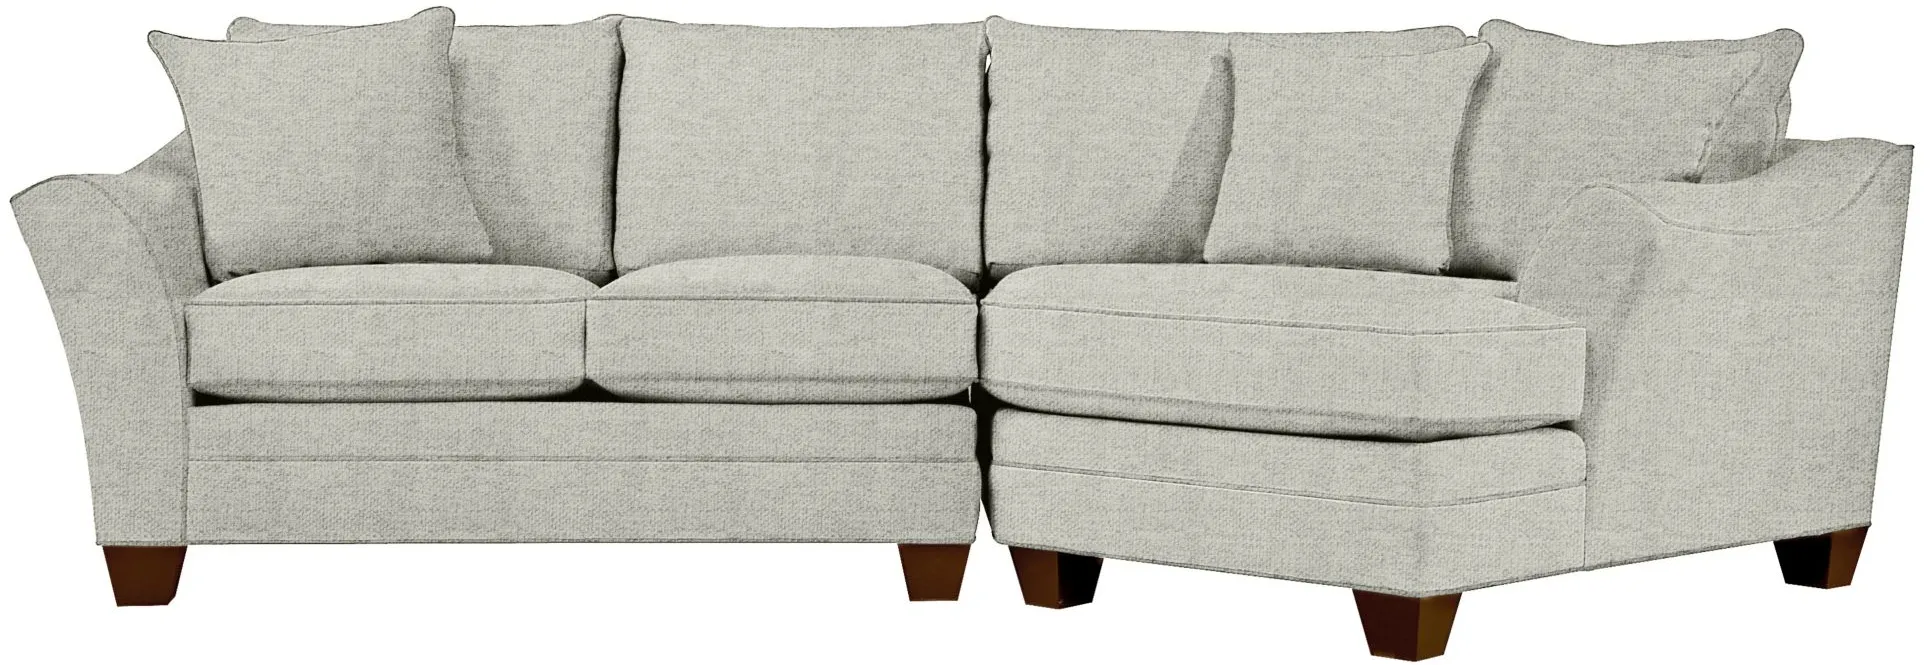 Foresthill 2-pc. Right Hand Cuddler Sectional Sofa in Elliot Smoke by H.M. Richards